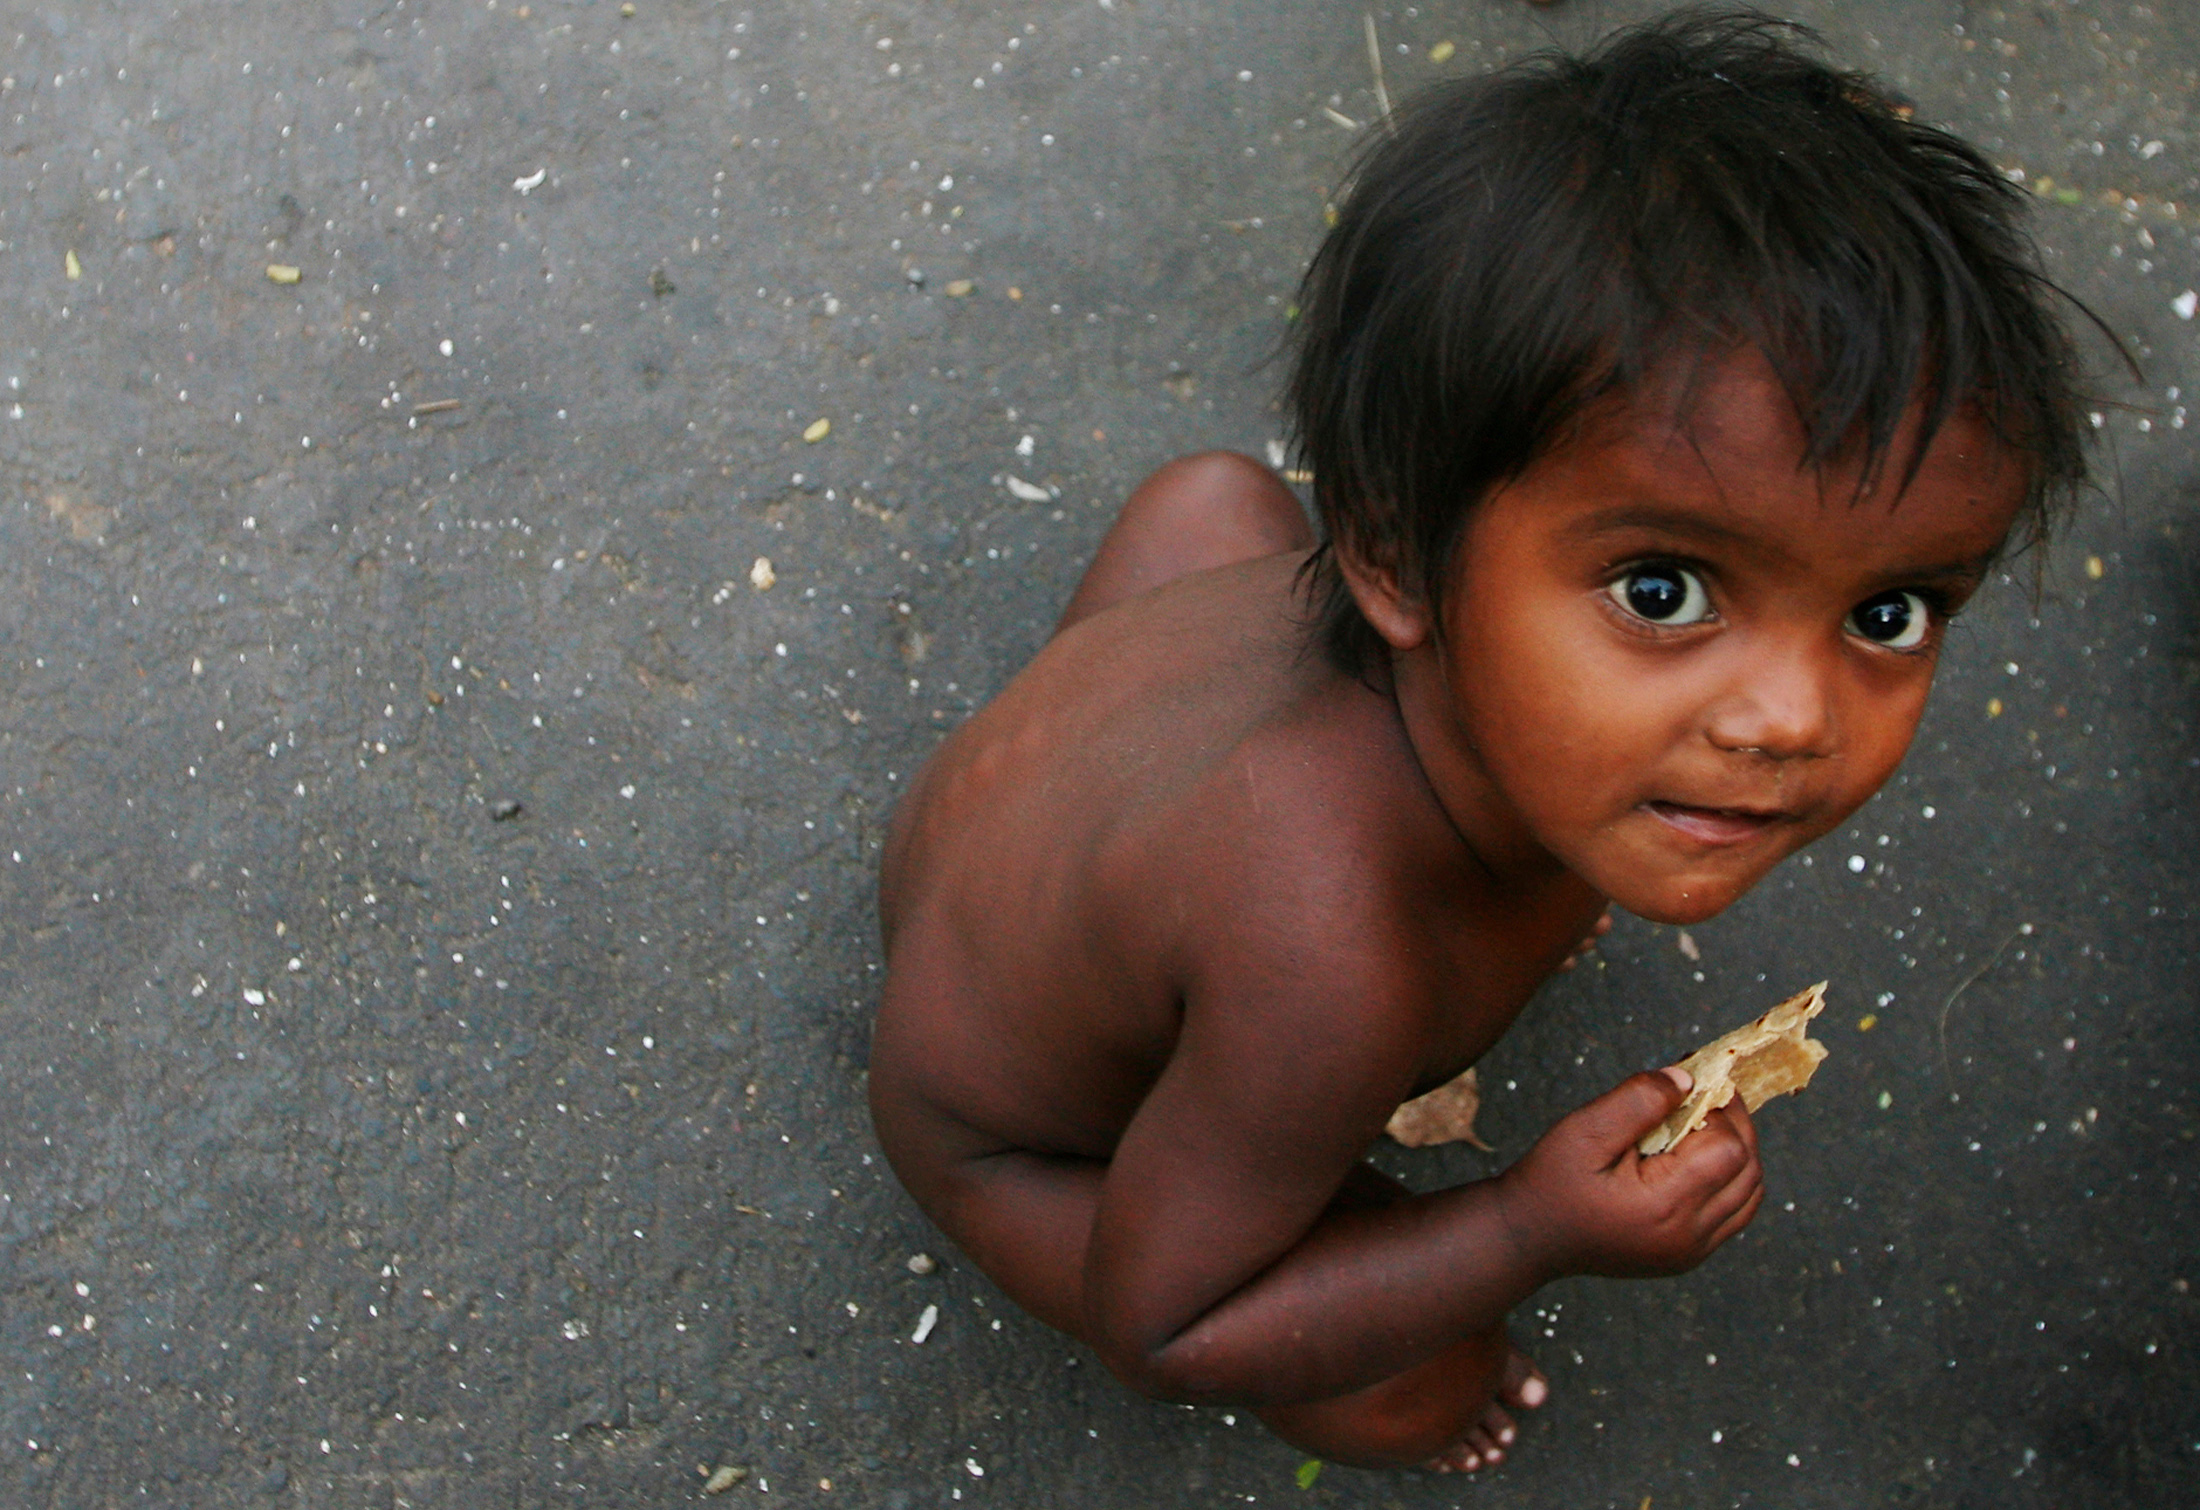 Read more about the article India experts hit back at government’s hunger report criticism | South China Morning Post